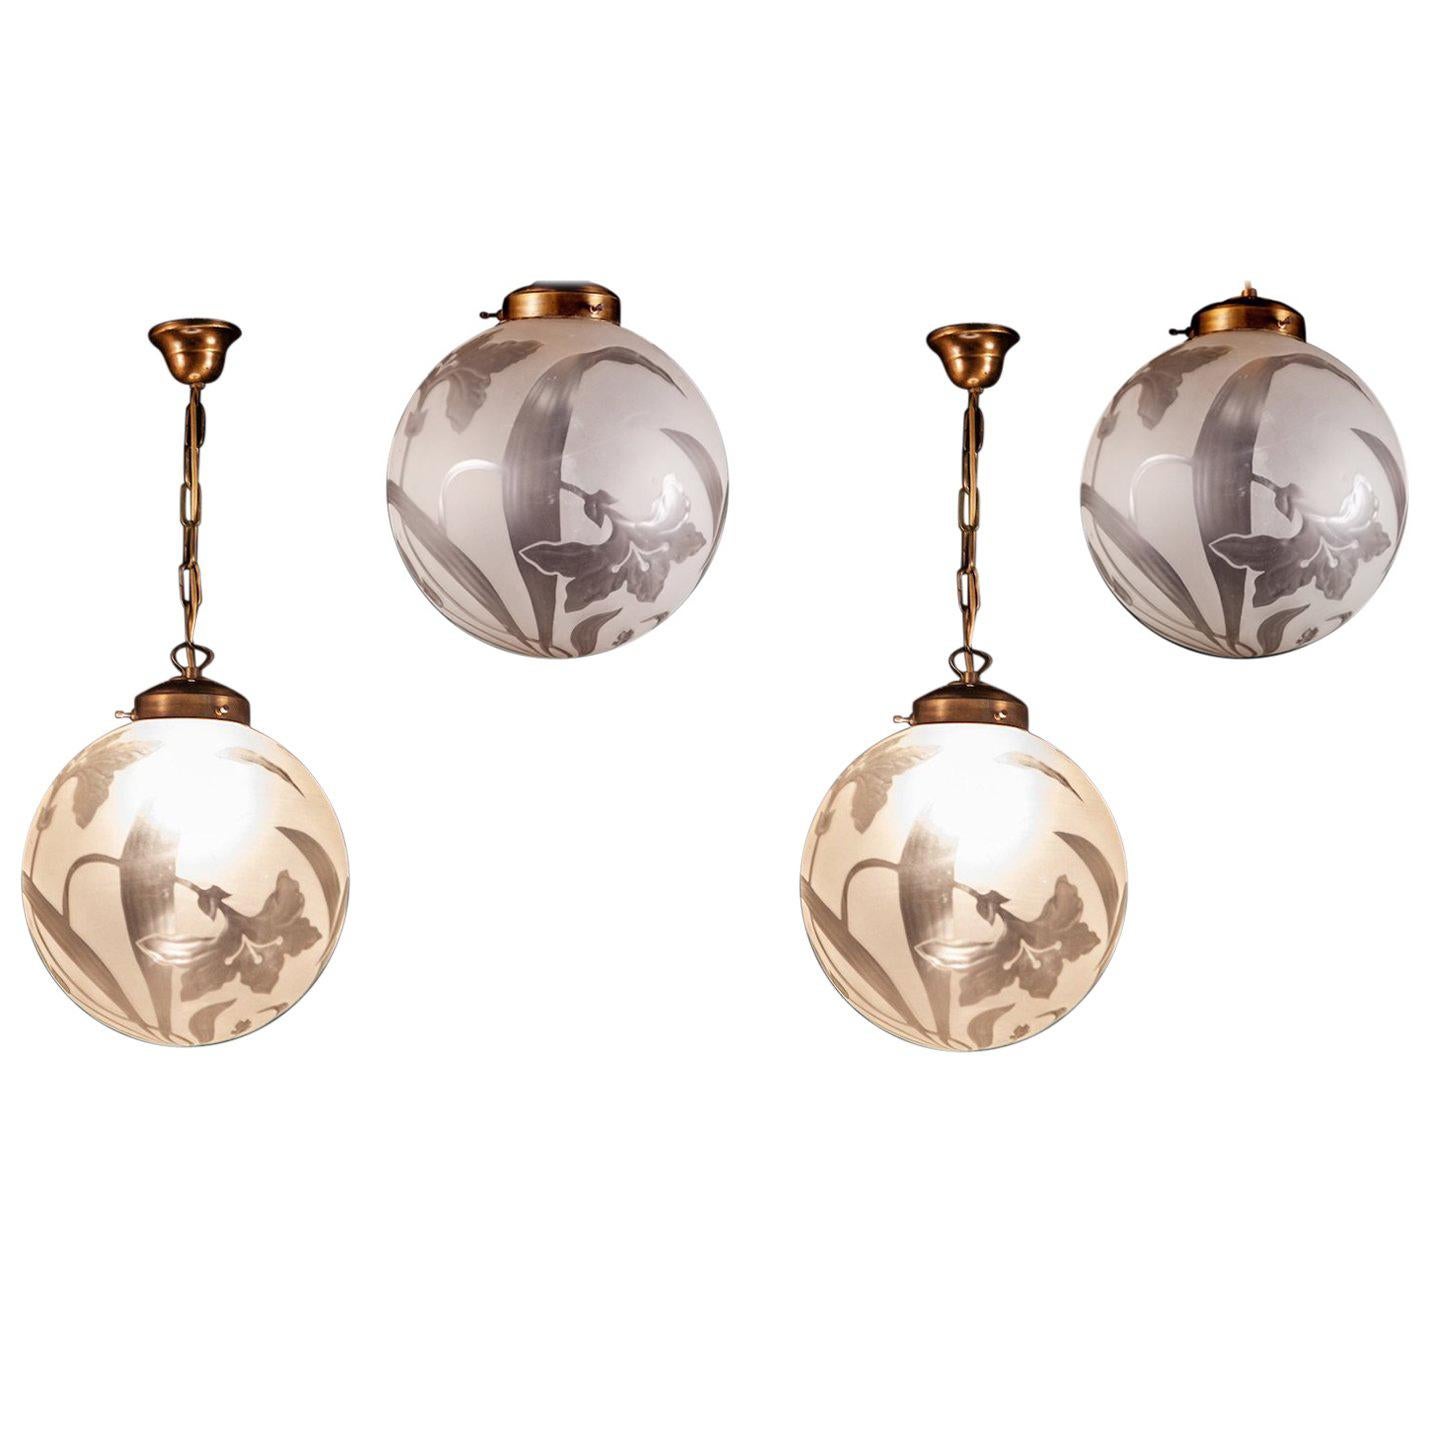 Four Liberty Engraved Glass Sphere Chandeliers or Lanterns, Italy, 1940 For Sale